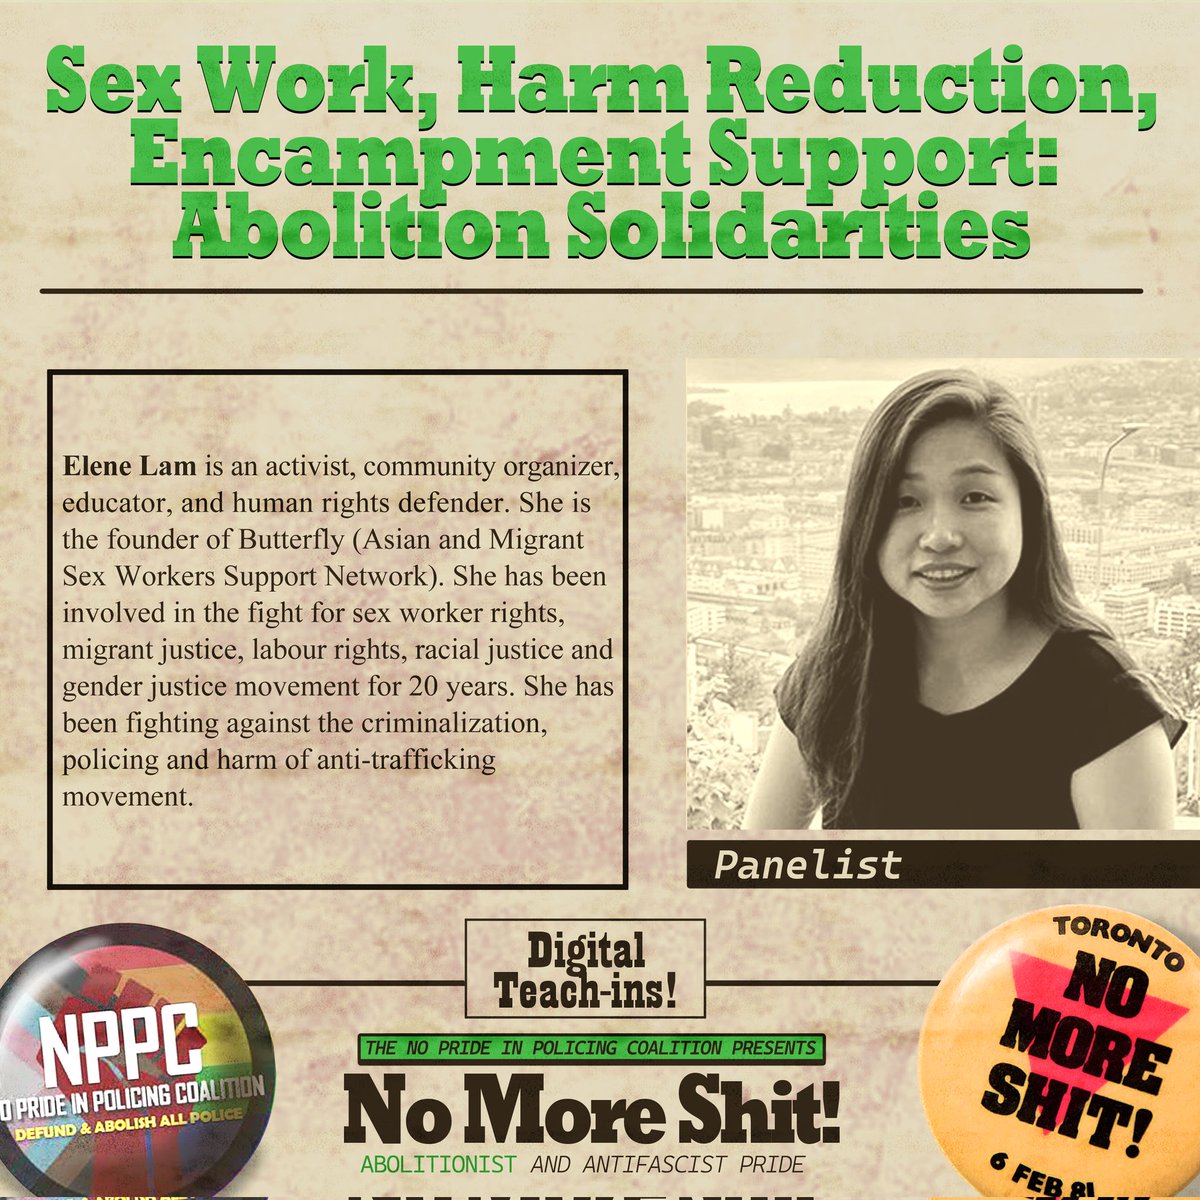 3/5

'Sex Work, Harm Reduction, Encampment Support: Abolition Solidarities'

Elene Lam is an activist, community organizer, educator & human rights defender. Founder of @ButterflyCSW she fights the criminalization, policing & harm of anti-trafficking movement.

#NoMoreShit #PRIDE